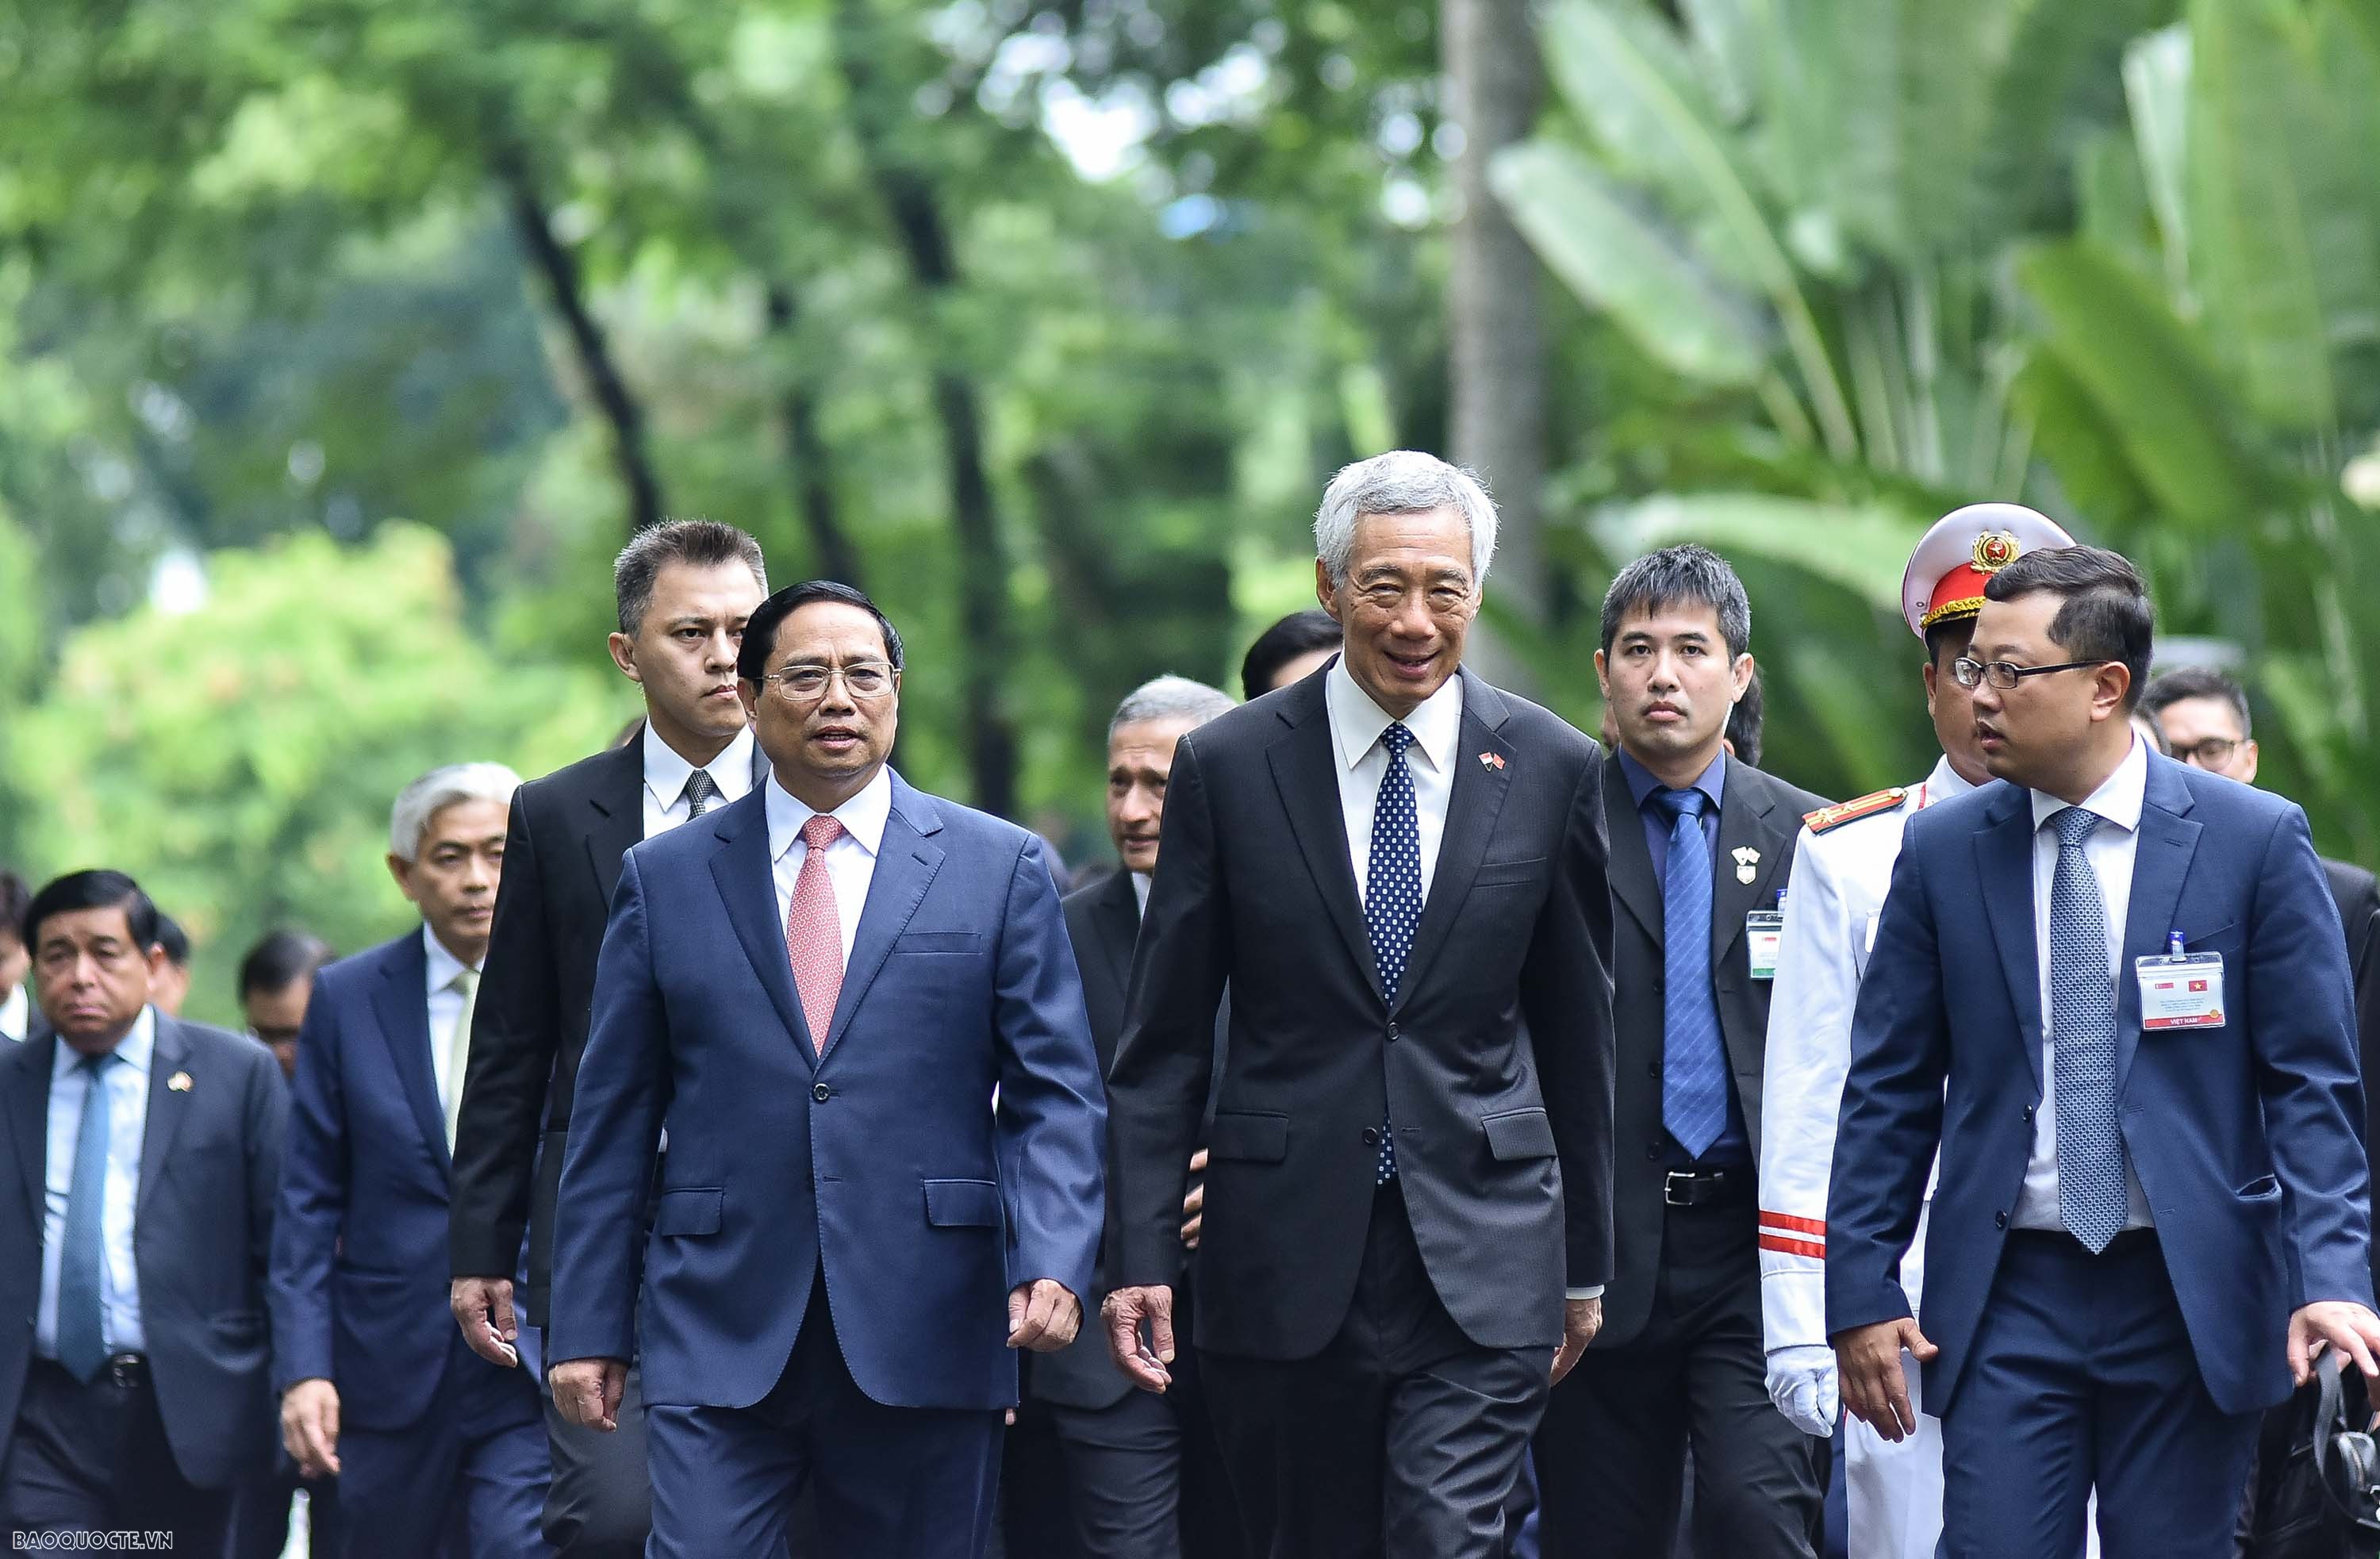 Official welcome ceremony held for Singaporean Prime Minister Lee Hsien Loong